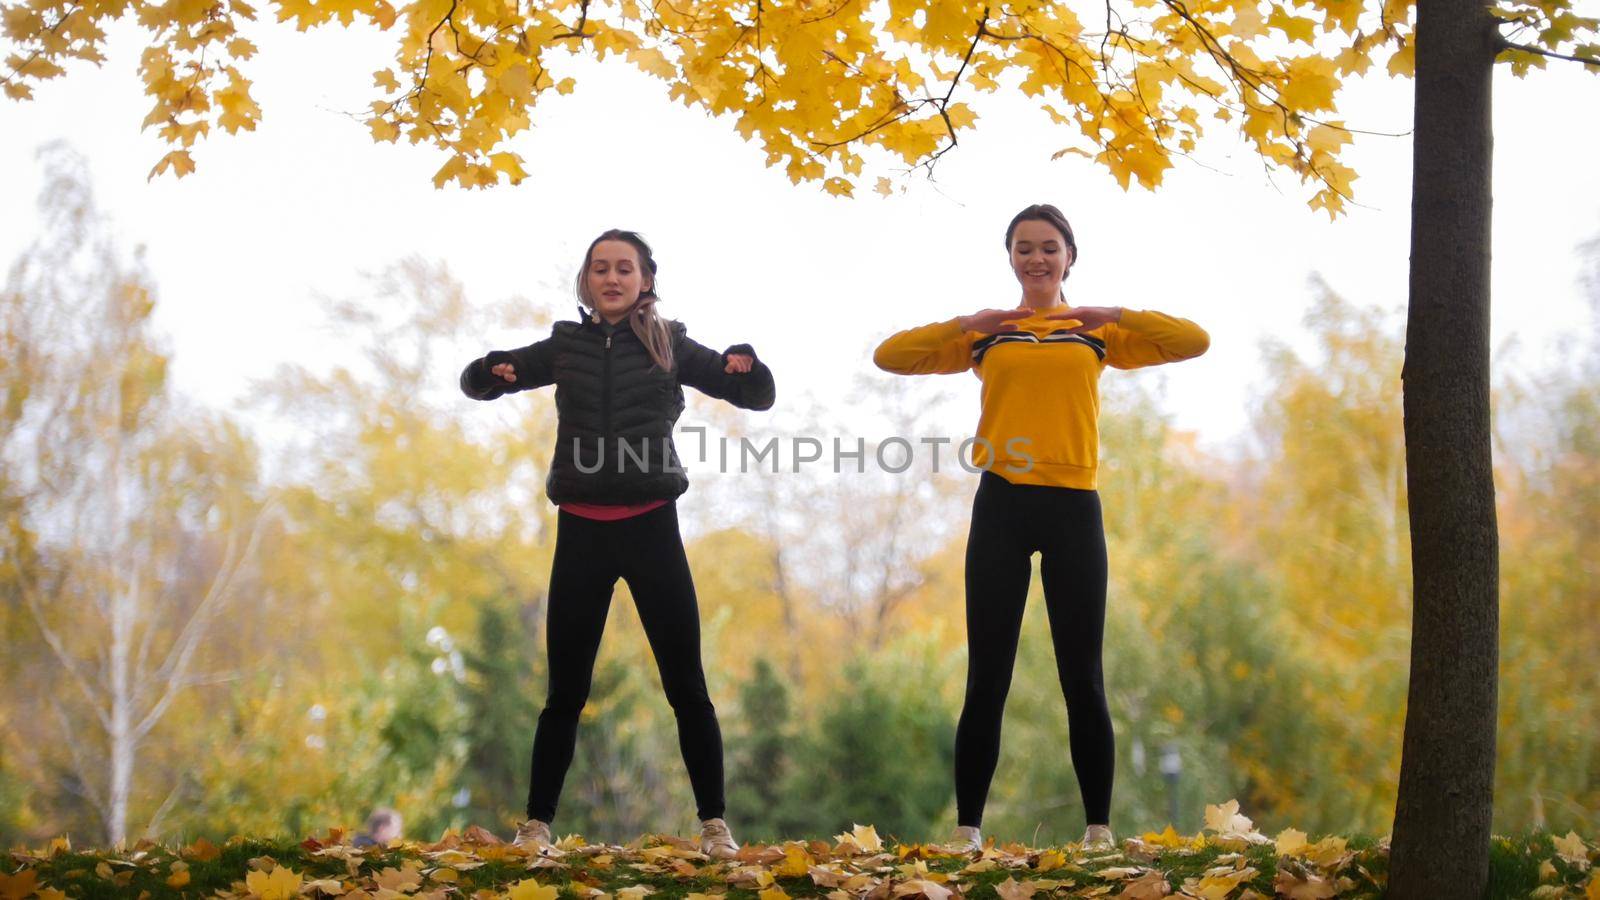 Acrobatic girls in jackets warming up outside before training in park. Hands to the sides. Autumn